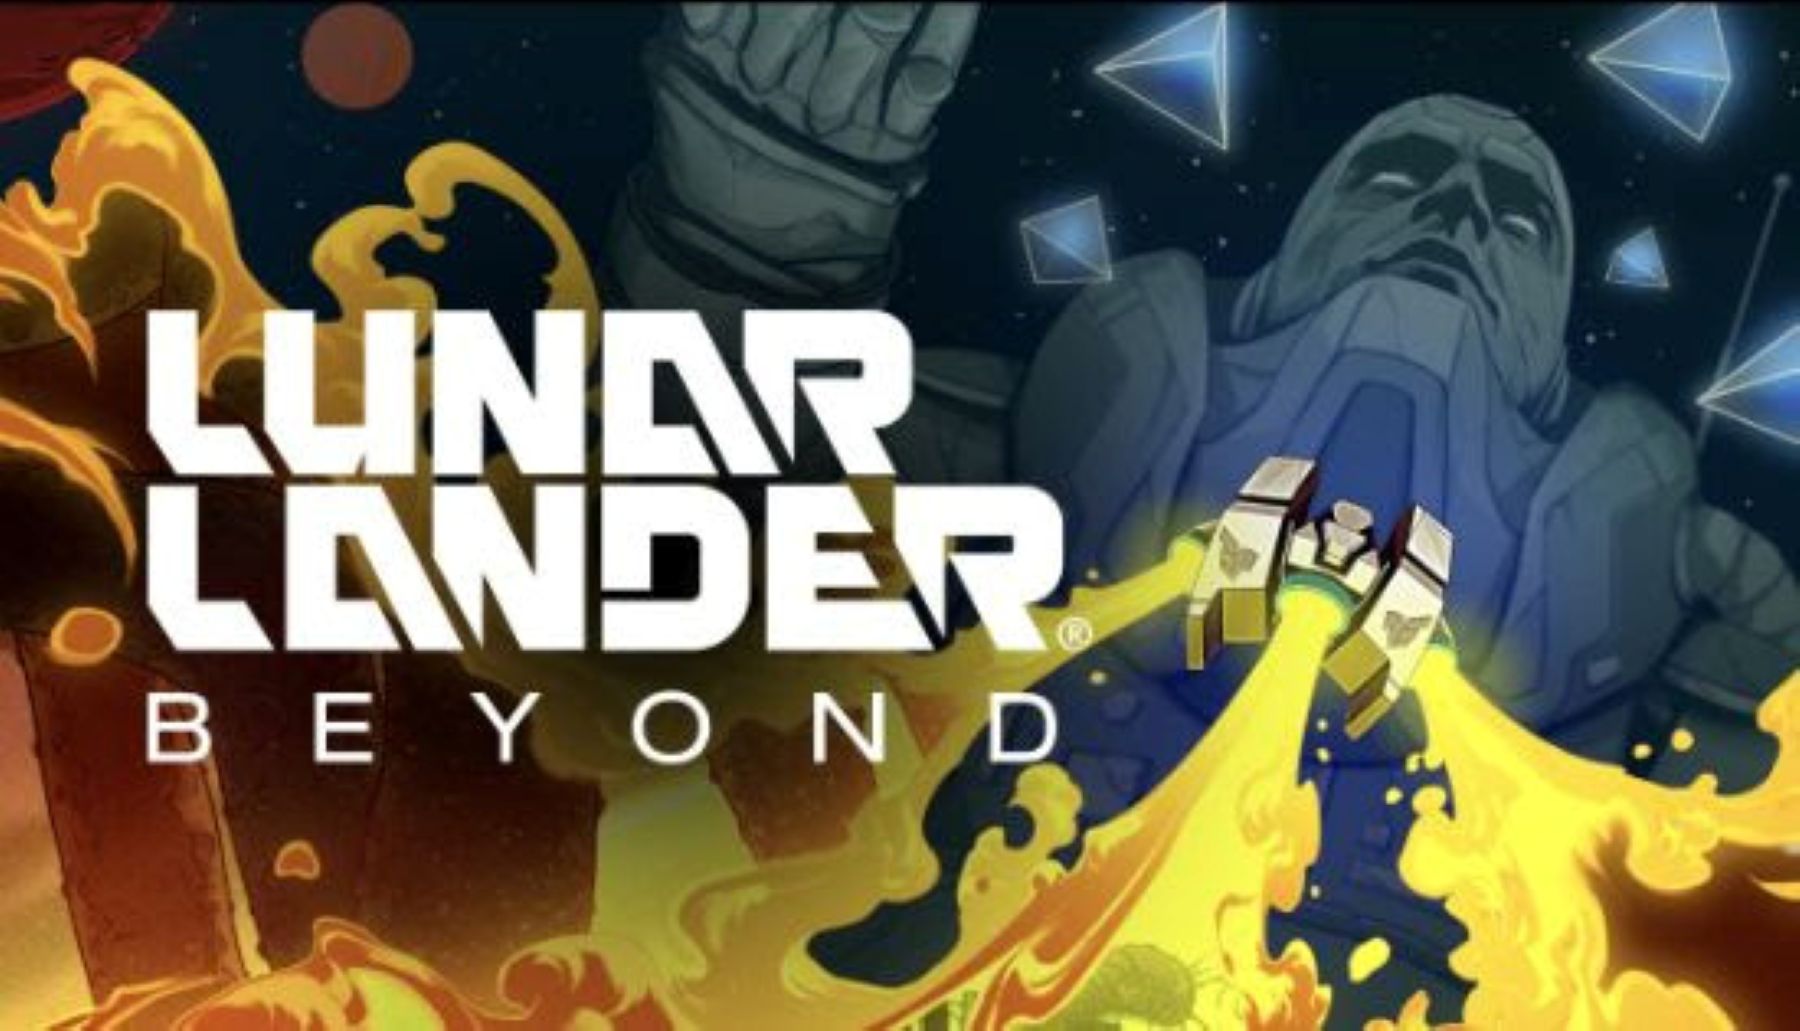 Lunar Lander Beyond Makes First Contact on April 23rd — Preorder the Deluxe Steelbook Edition Now